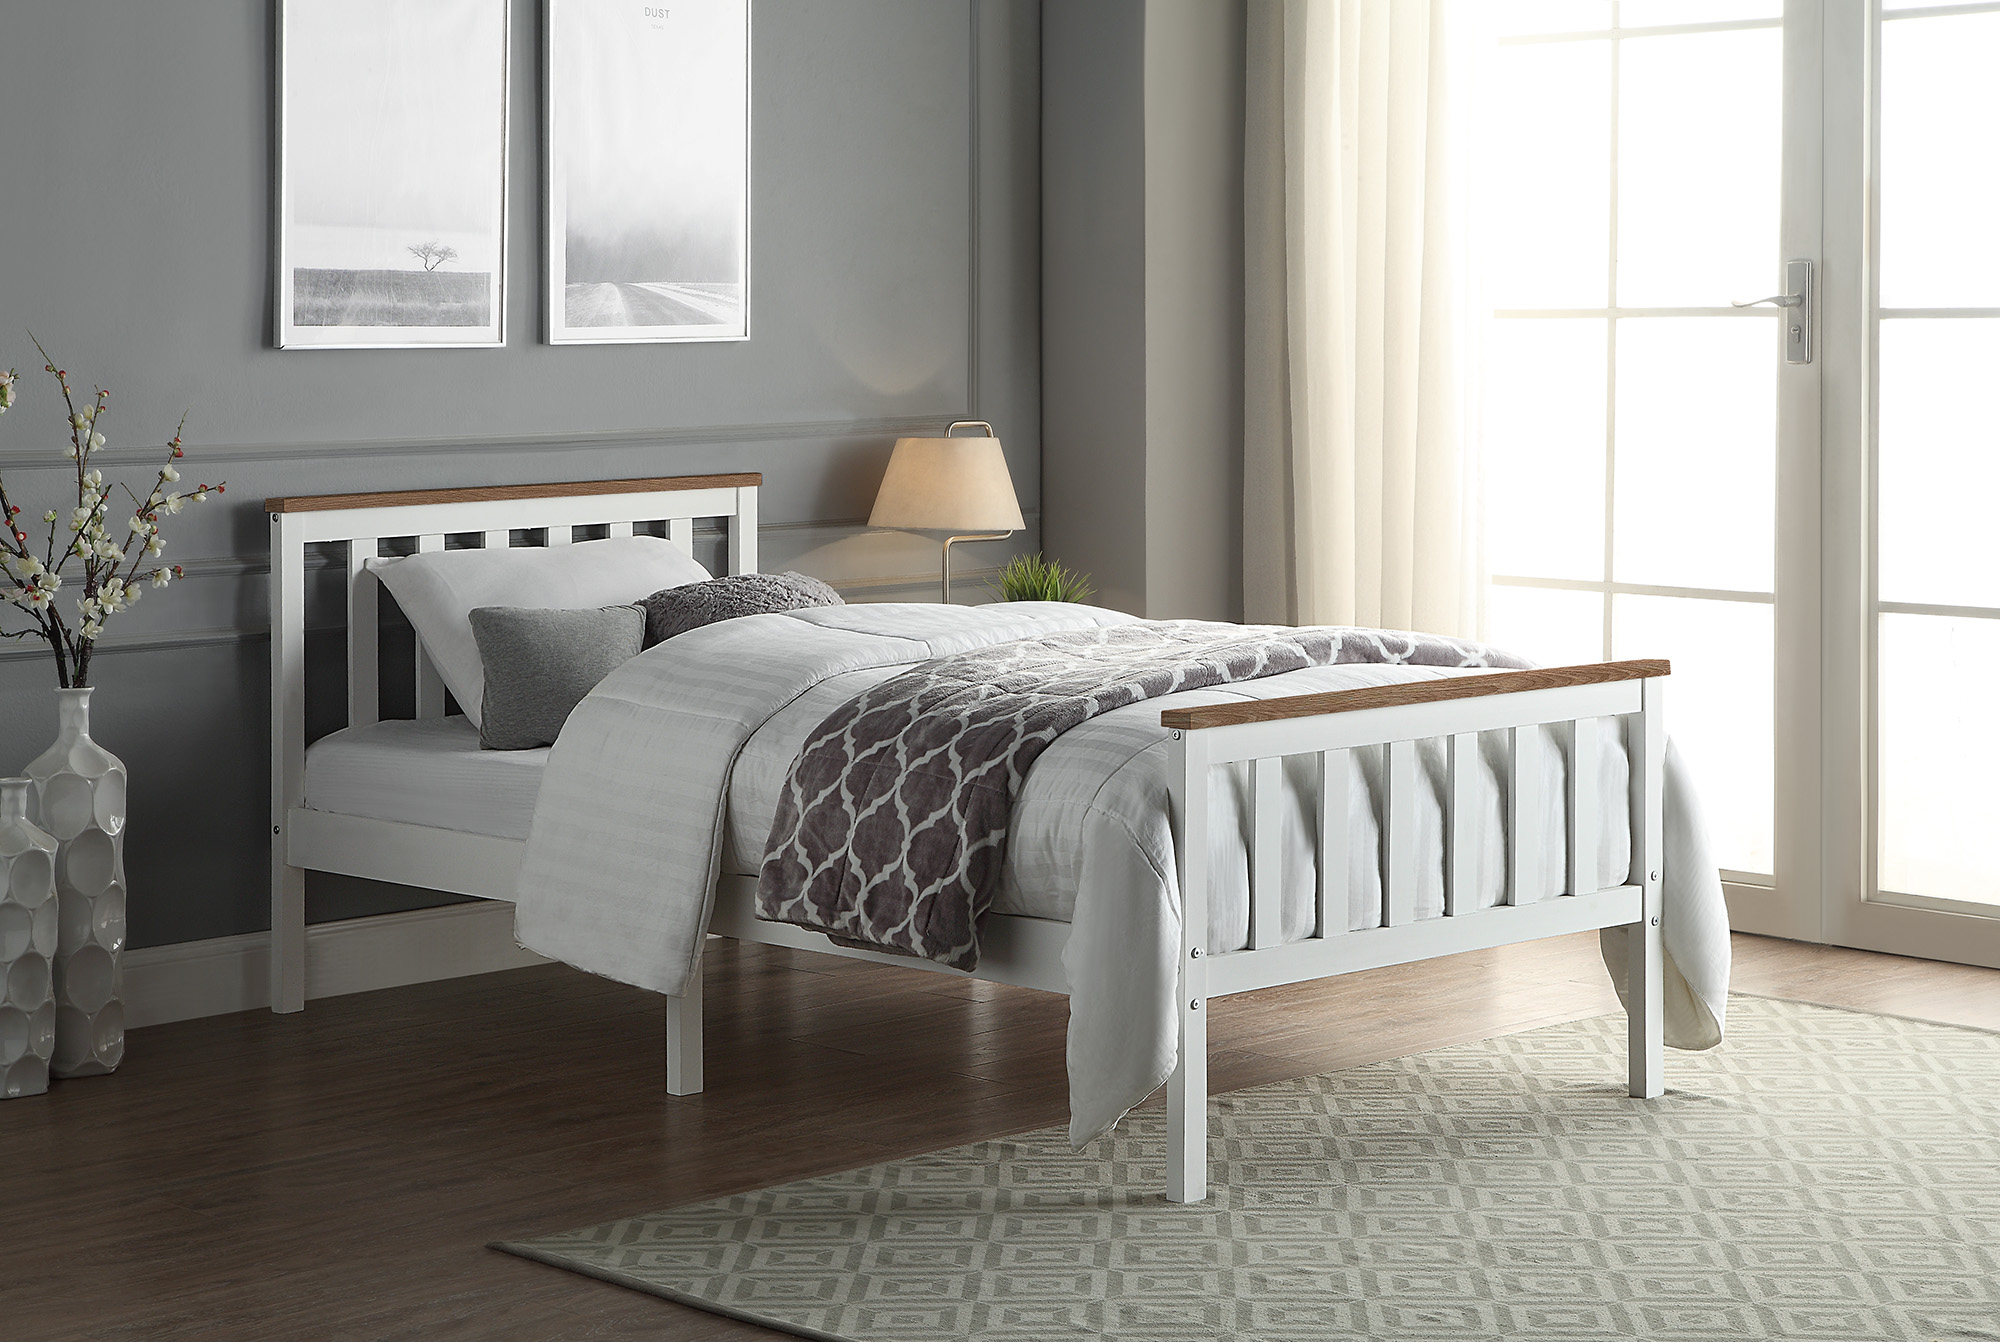 Single Bed Frame in White and Pine Solid Wood | BedSale.com